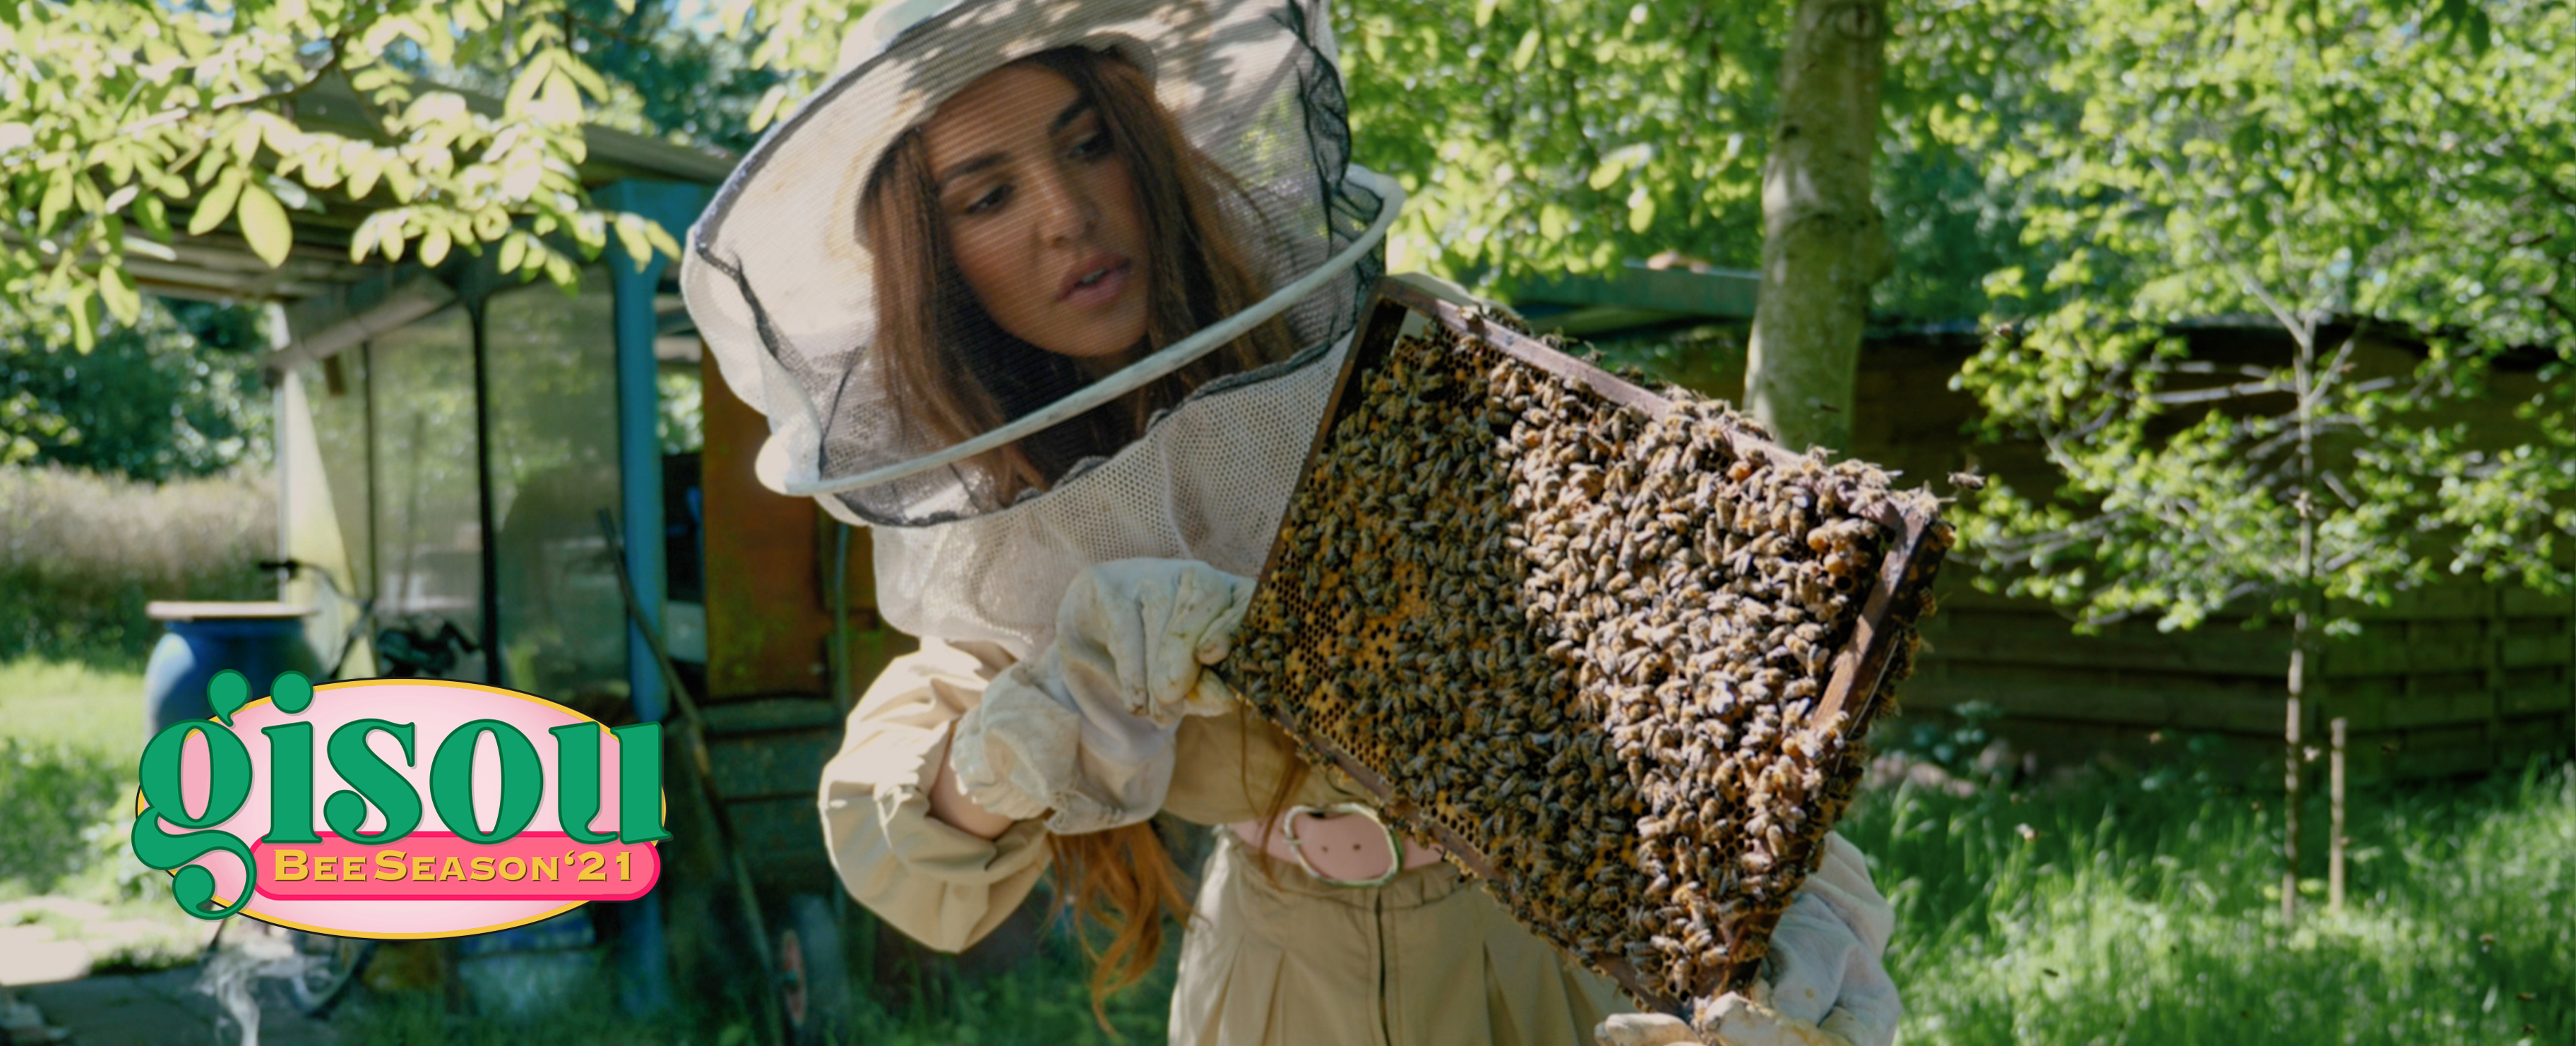 Negin holding a tray of bees in the Mirsalehi bee garden